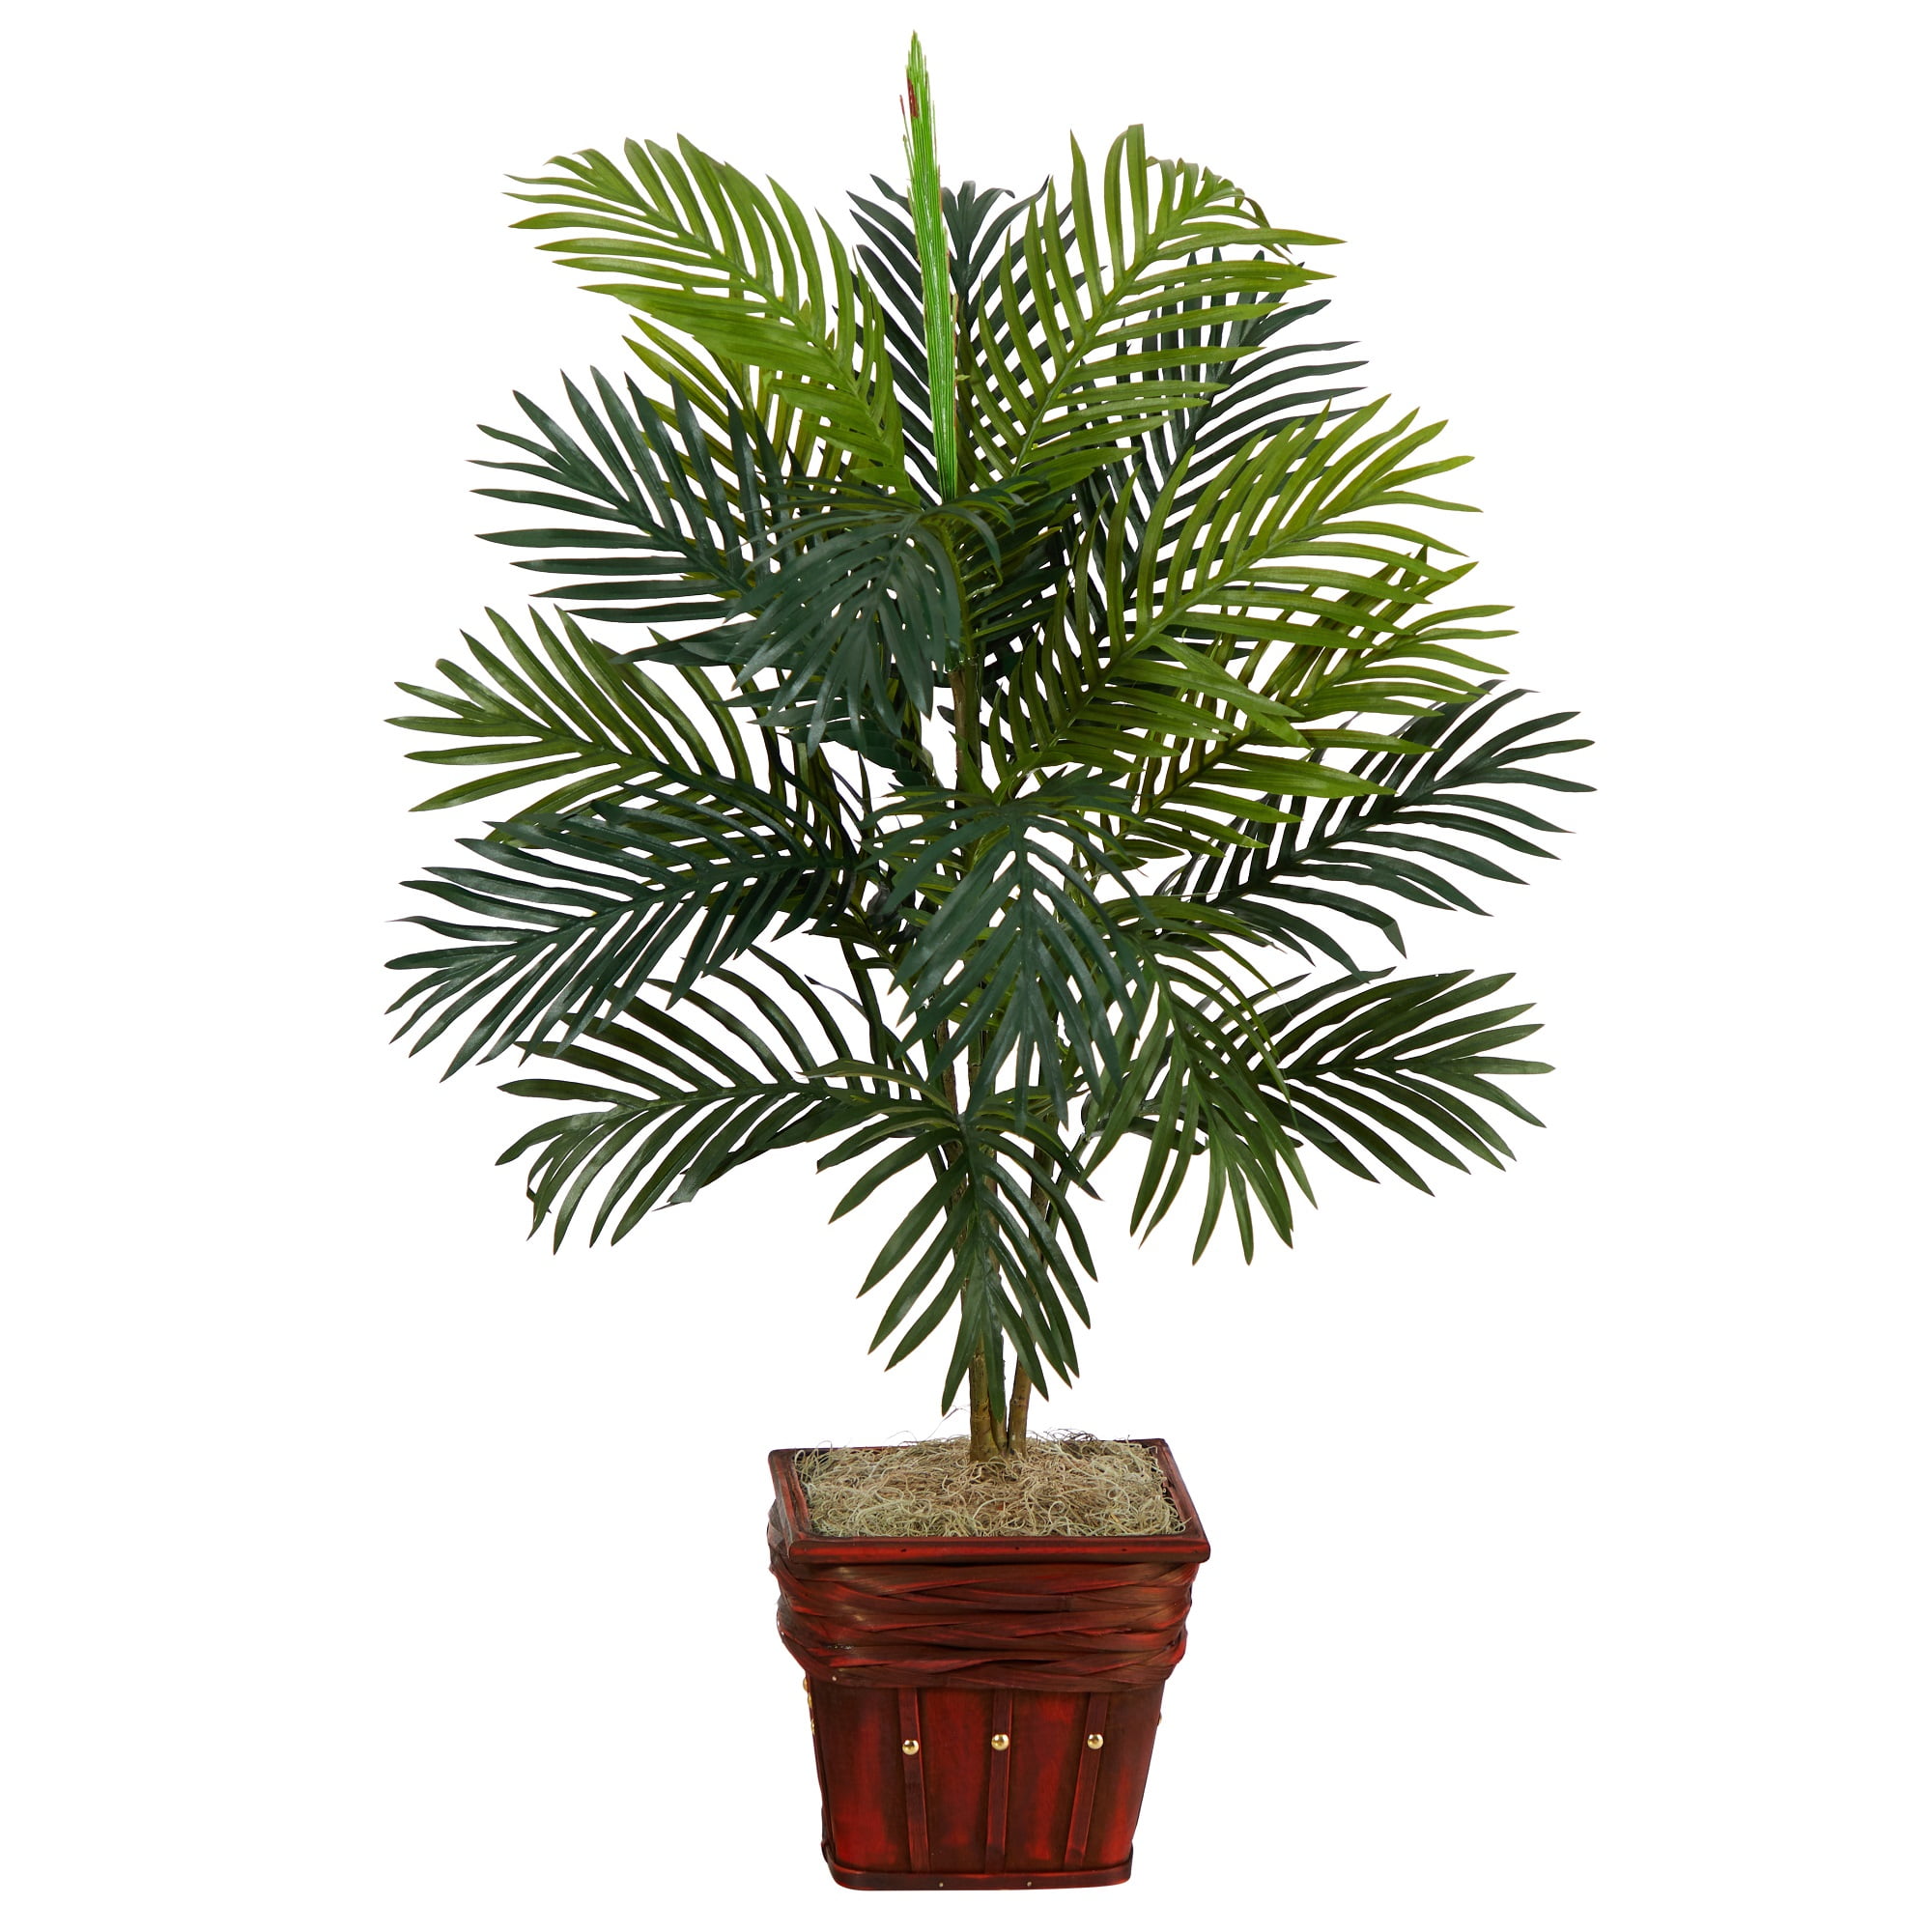 Details about   32" Artificial Areca Palm Plant w/ Bamboo Vase Lifelike Realistic Green Leaves 